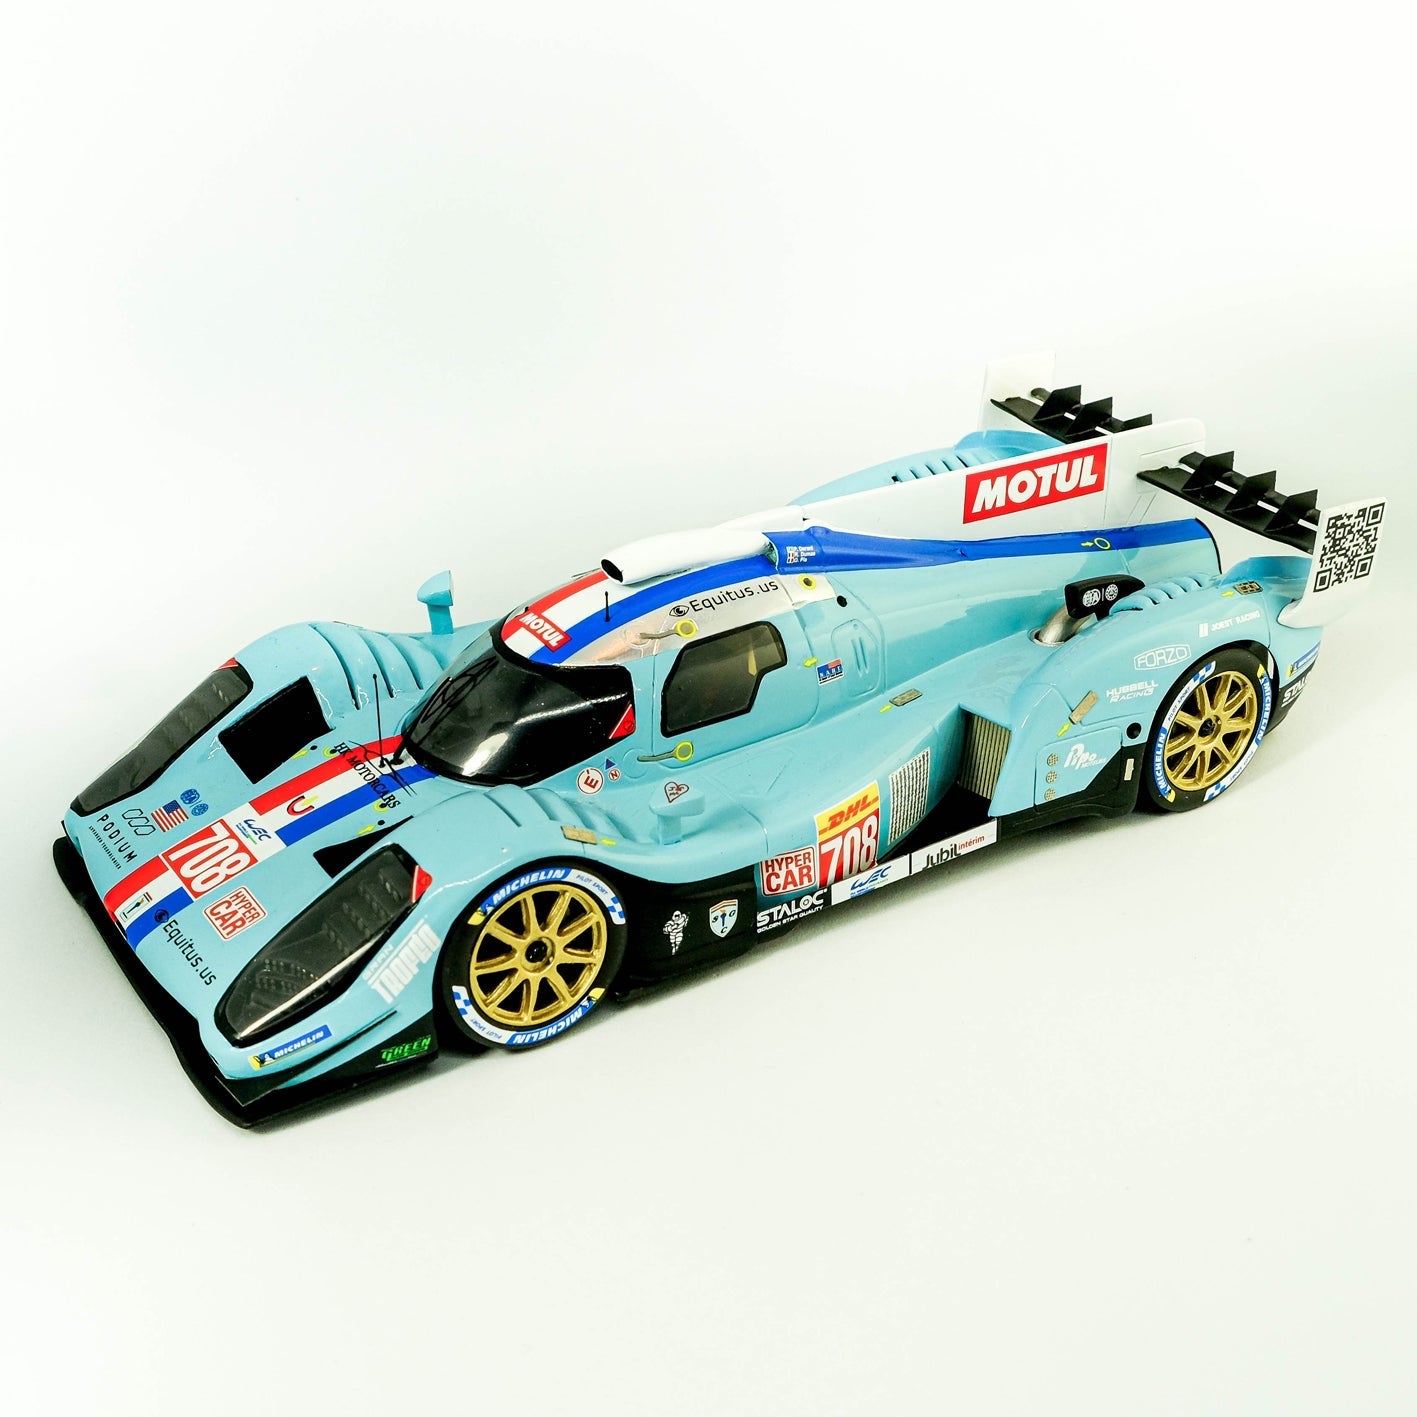 GLICKENHAUS SC G007 LMH - FIA WEC 6 HOURS OF MONZA & 24 HOURS LE MANS